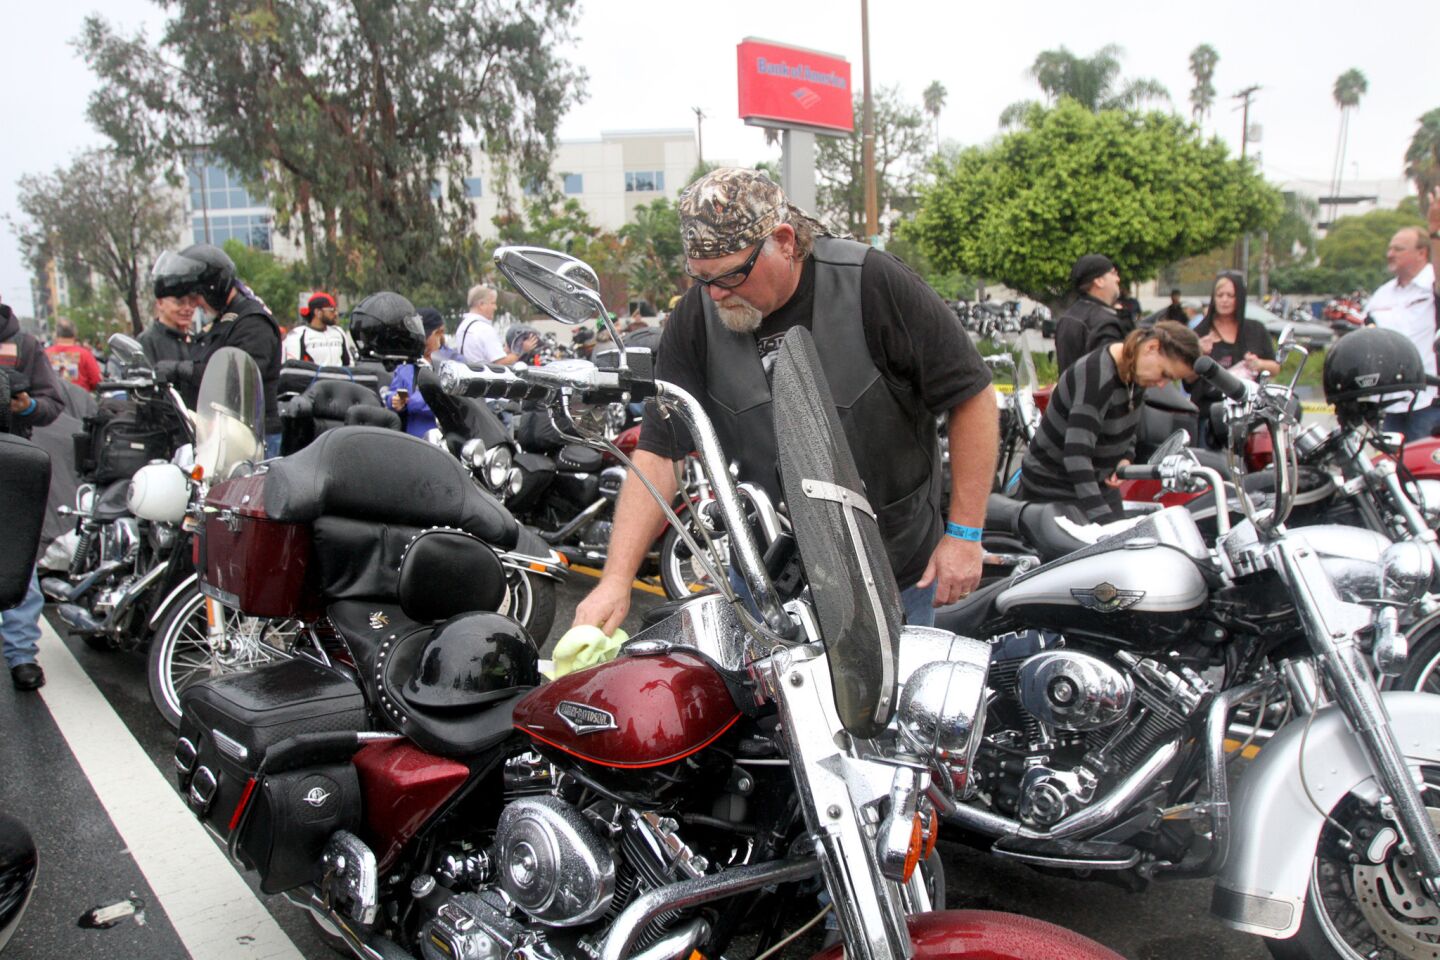 With a steady drizzle coming down, Tim Teaters of Modesto wipes rain off his motorcycle prior to the start of the 32nd annual Love Ride at Harley-Davidson Motorcycles in Glendale on Sunday, October 18, 2015. This will be the last fundraising Love Ride.